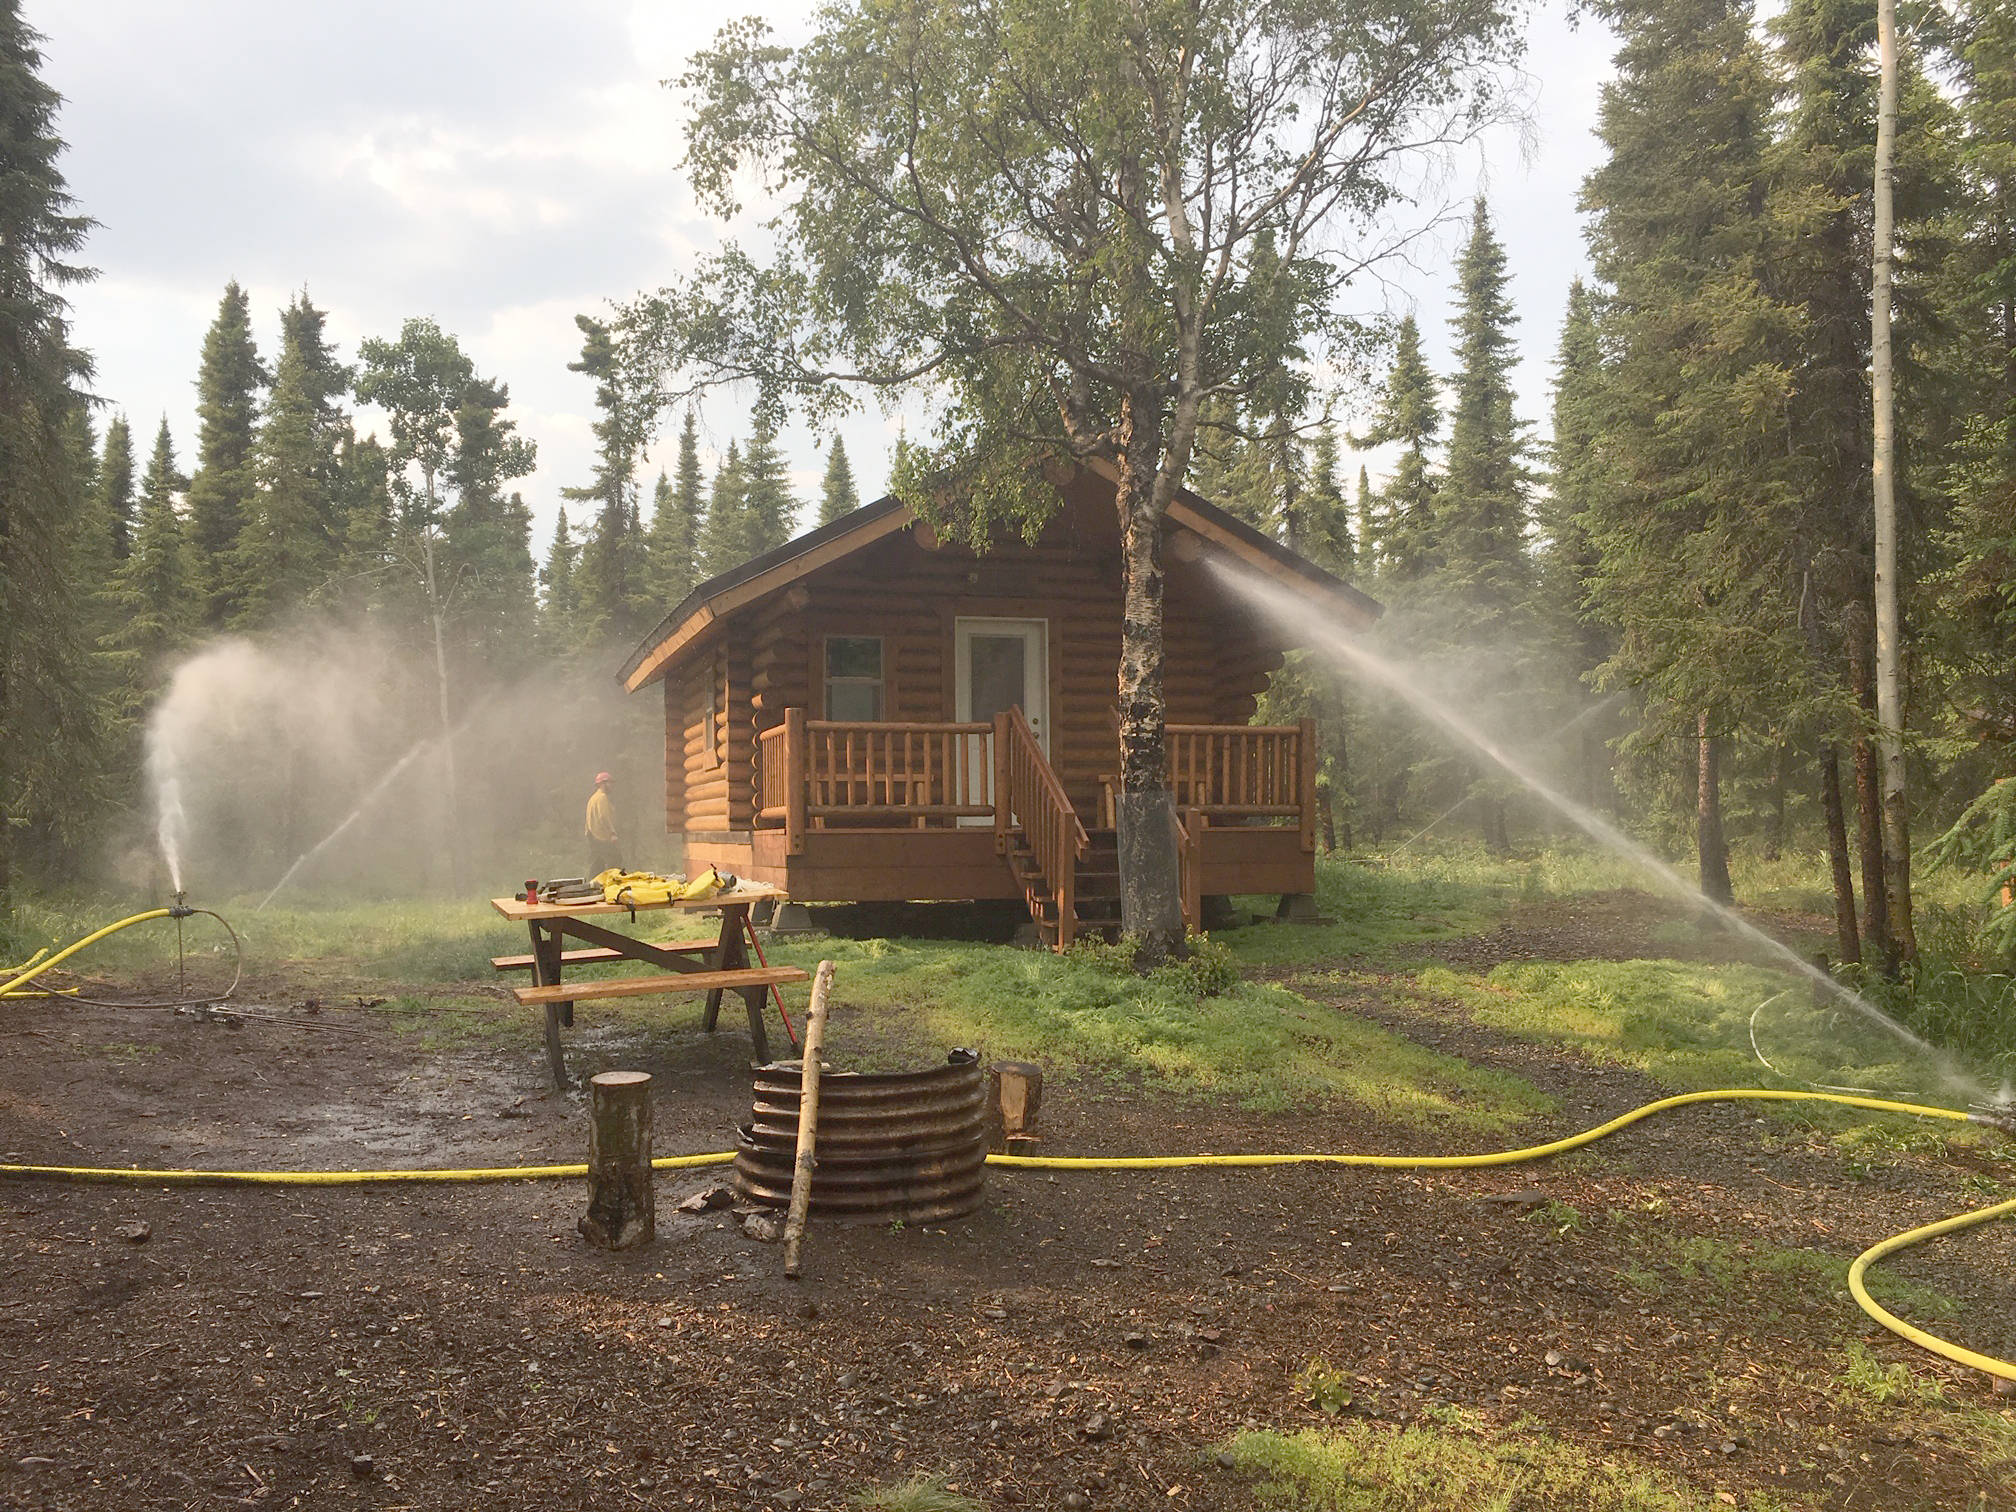 Sprinklers were used as one part of the structure protection plan for the Kelly Lake cabin. (Photo provided by Kenai National Wildlife Refuge)